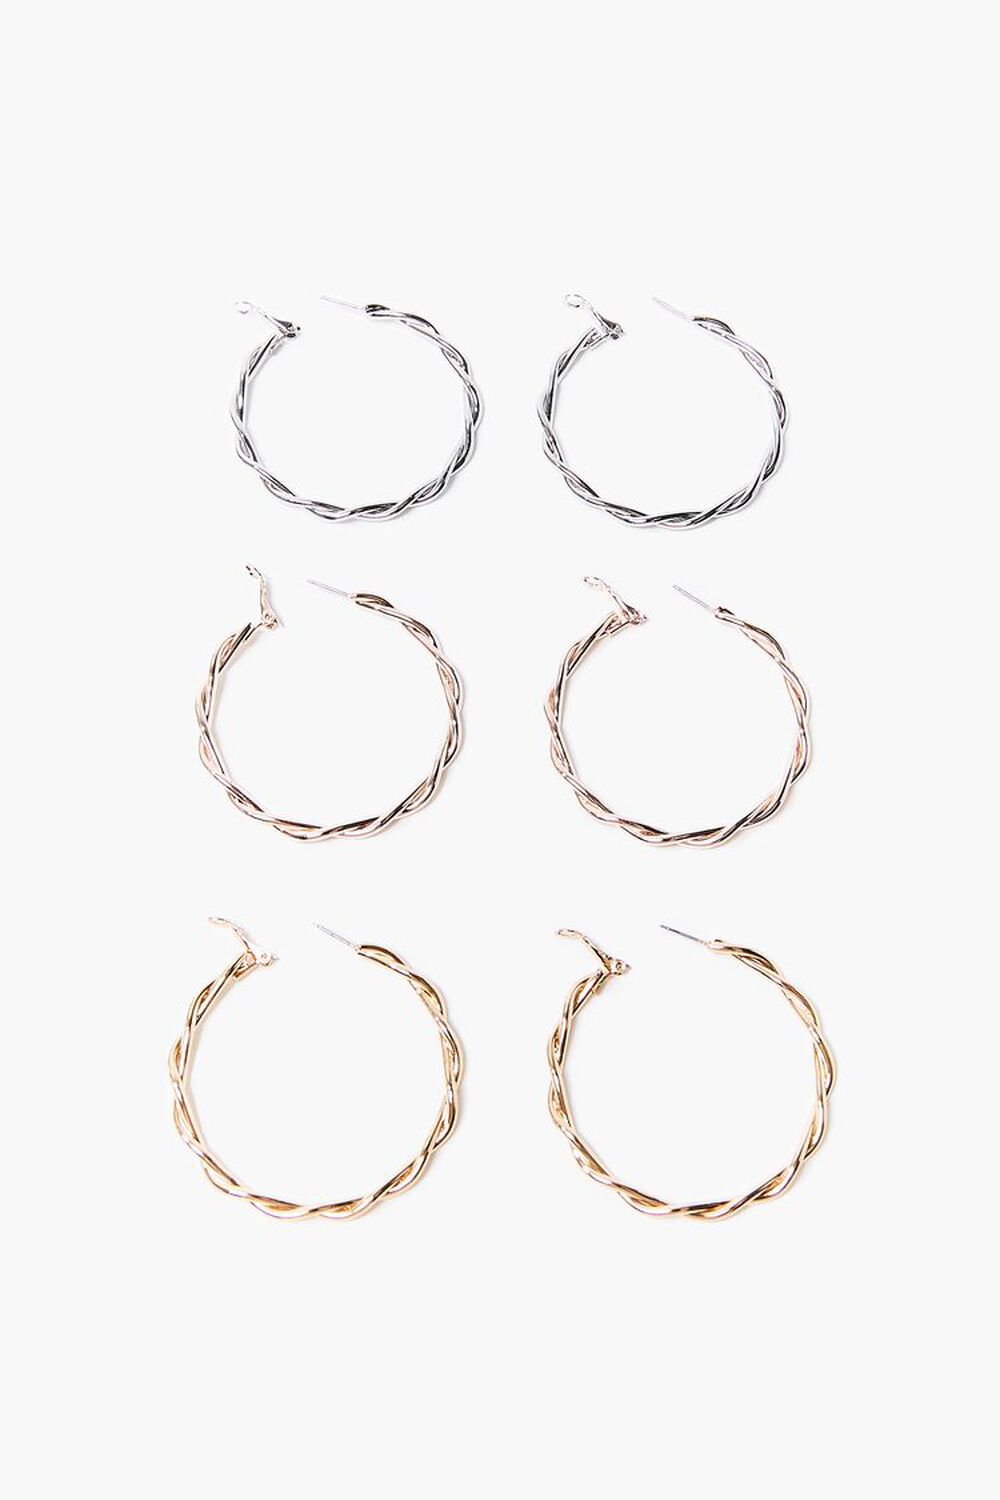 GOLD/SILVER Variety-Finish Twisted Hoop Earrings, image 1